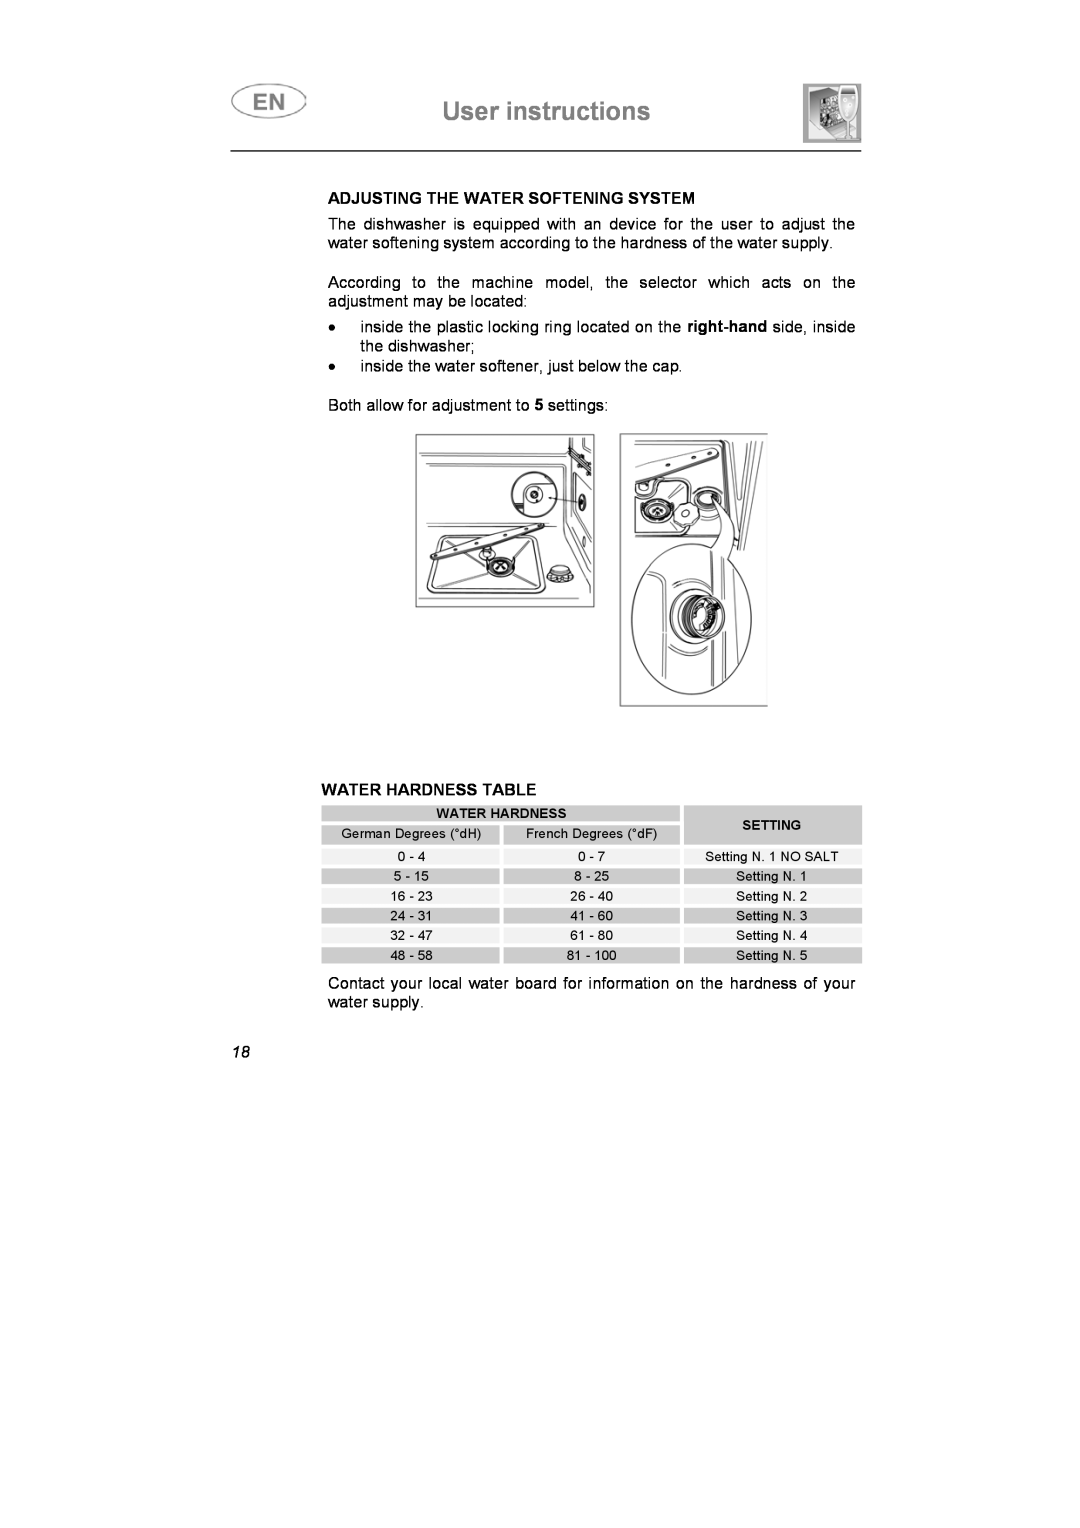 Smeg APL12-1 manual User instructions, Adjusting The Water Softening System, Water Hardness Table 